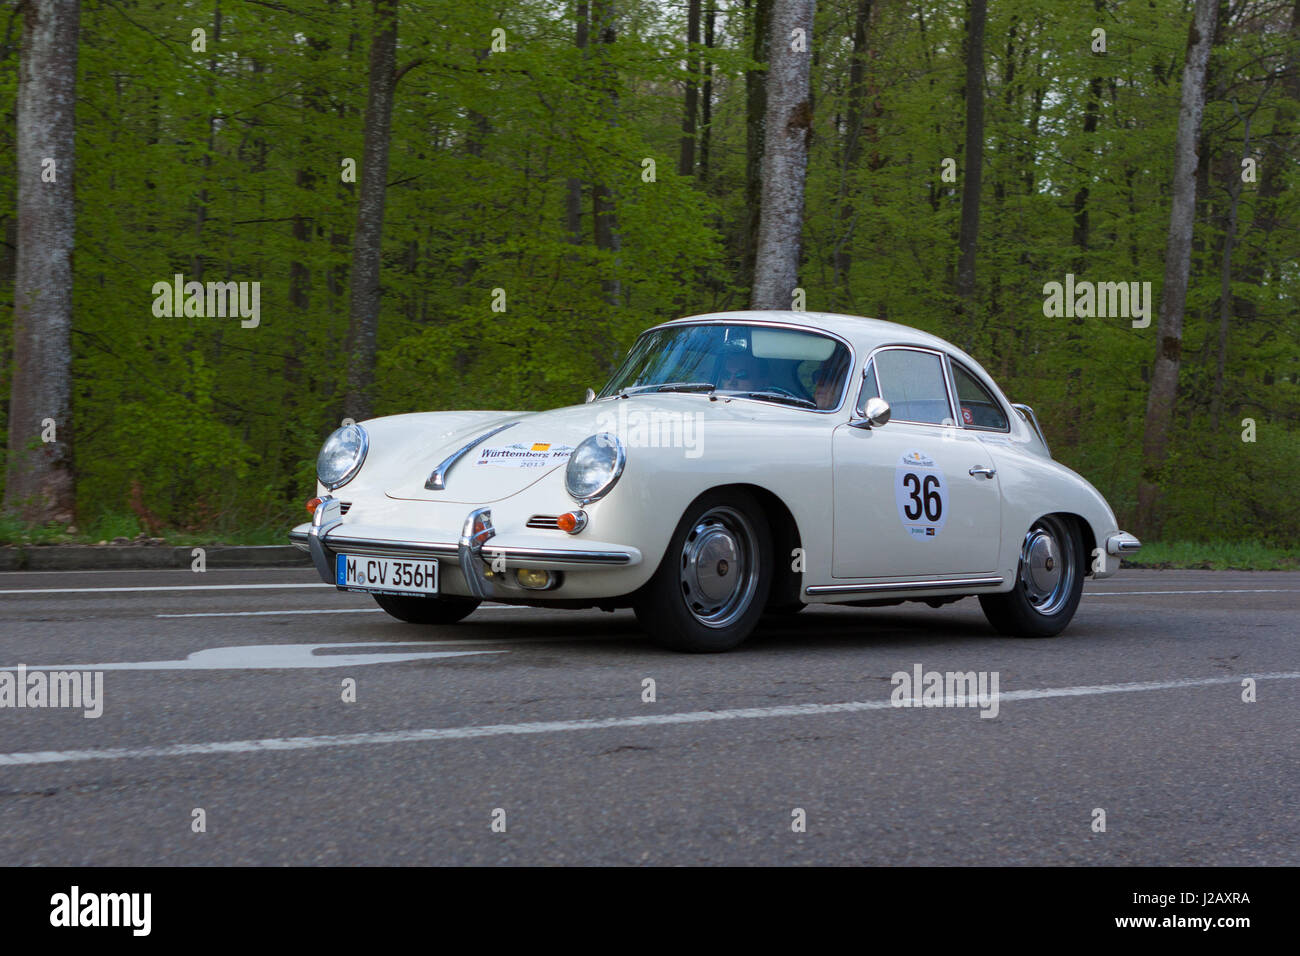 HEIDENHEIM, GERMANY - MAY 4, 2013: Dr. Thomas Strieder and Thomas Heinze in their 1965 Porsche 356 Coupe at the ADAC Wurttemberg Historic Rallye 2013  Stock Photo